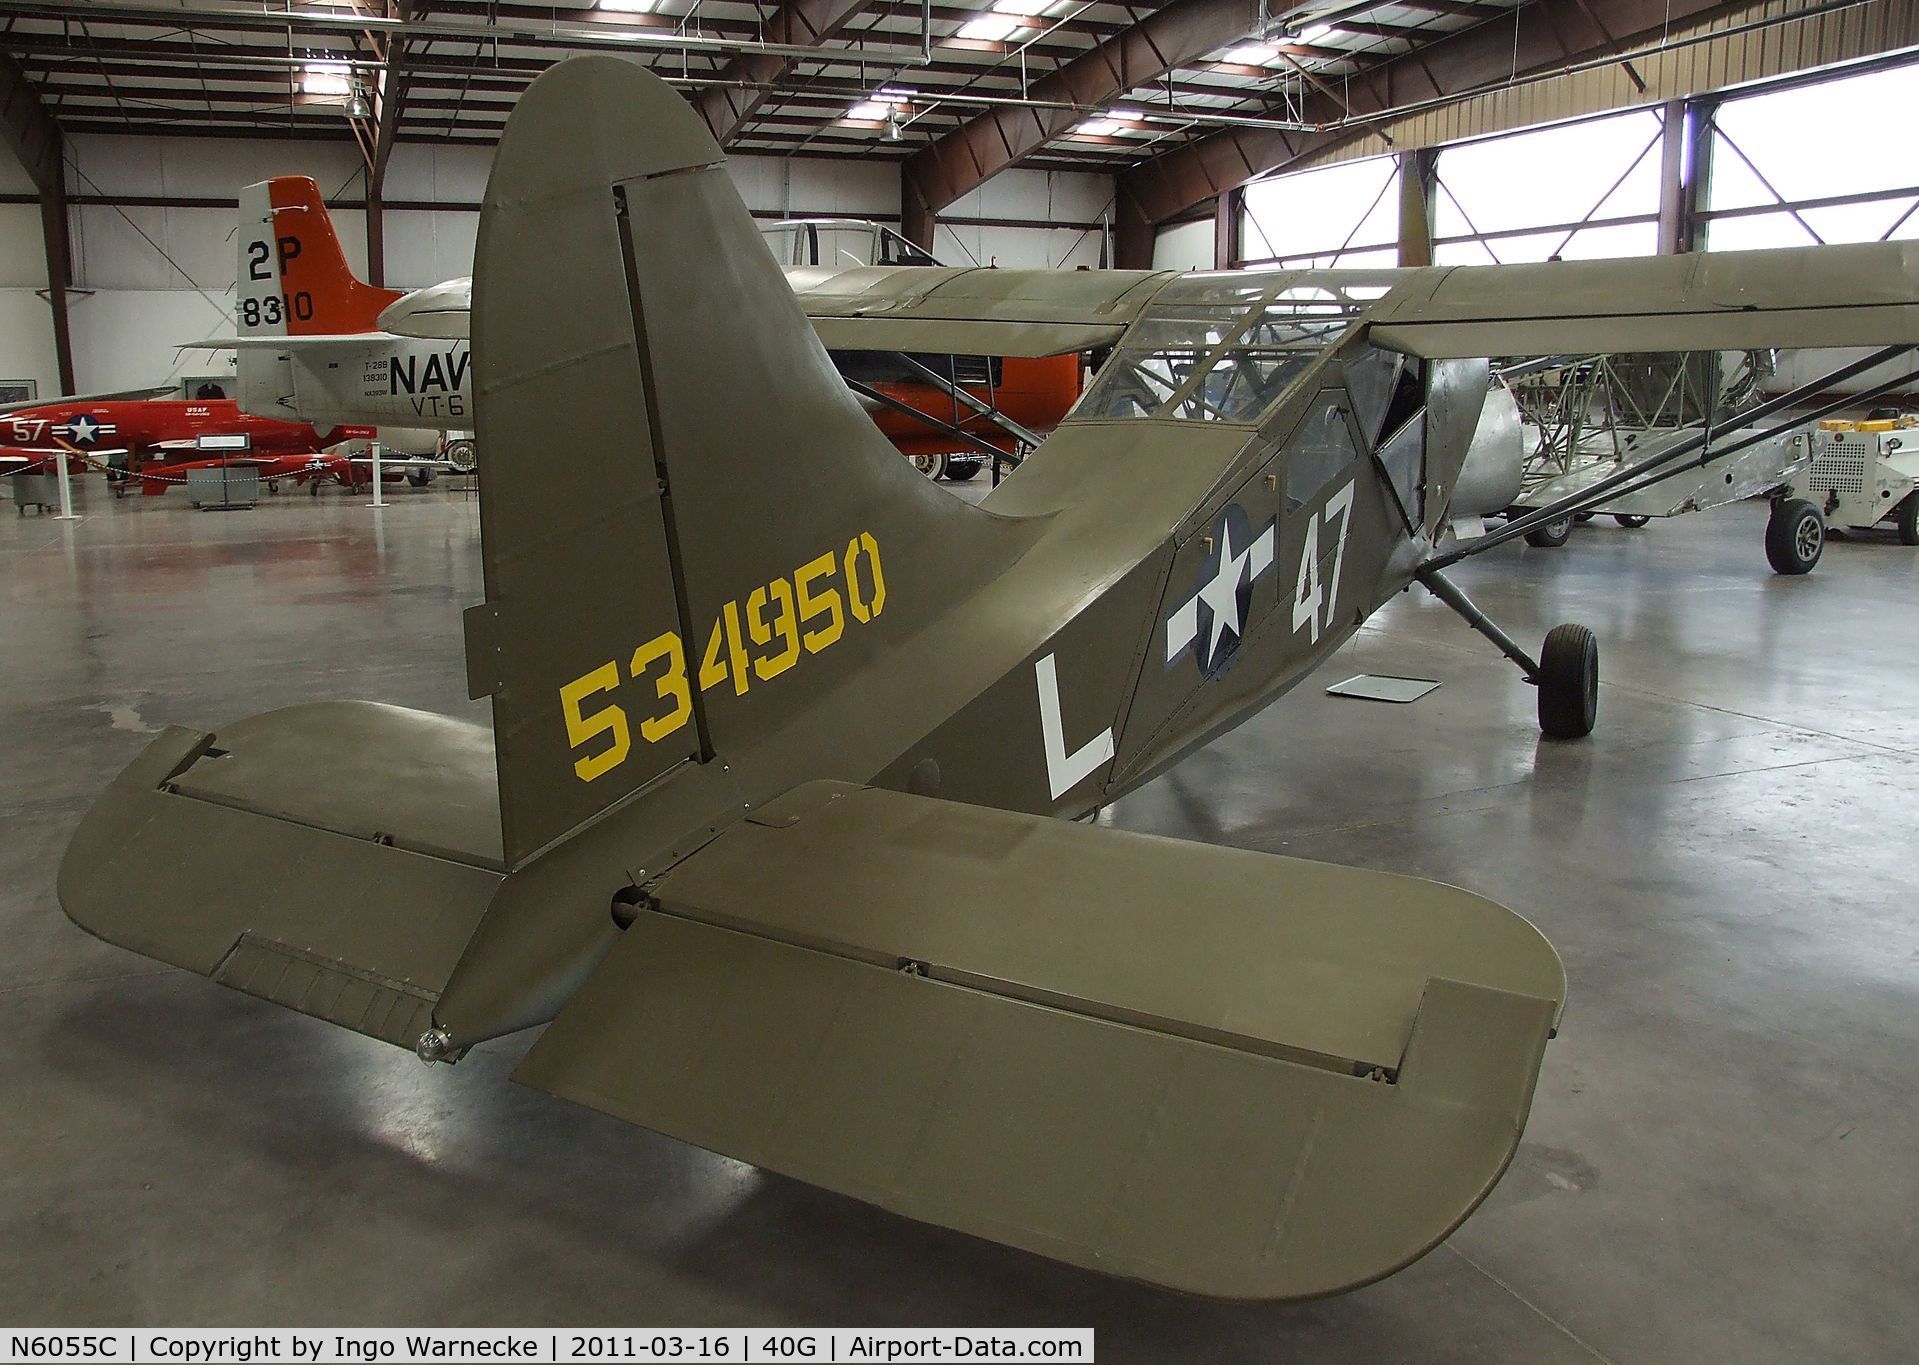 N6055C, 1945 Stinson U-19B (L-5G) C/N Not found 45-34950/N6055C, Stinson L-5G Sentinel at the Planes of Fame Air Museum, Valle AZ